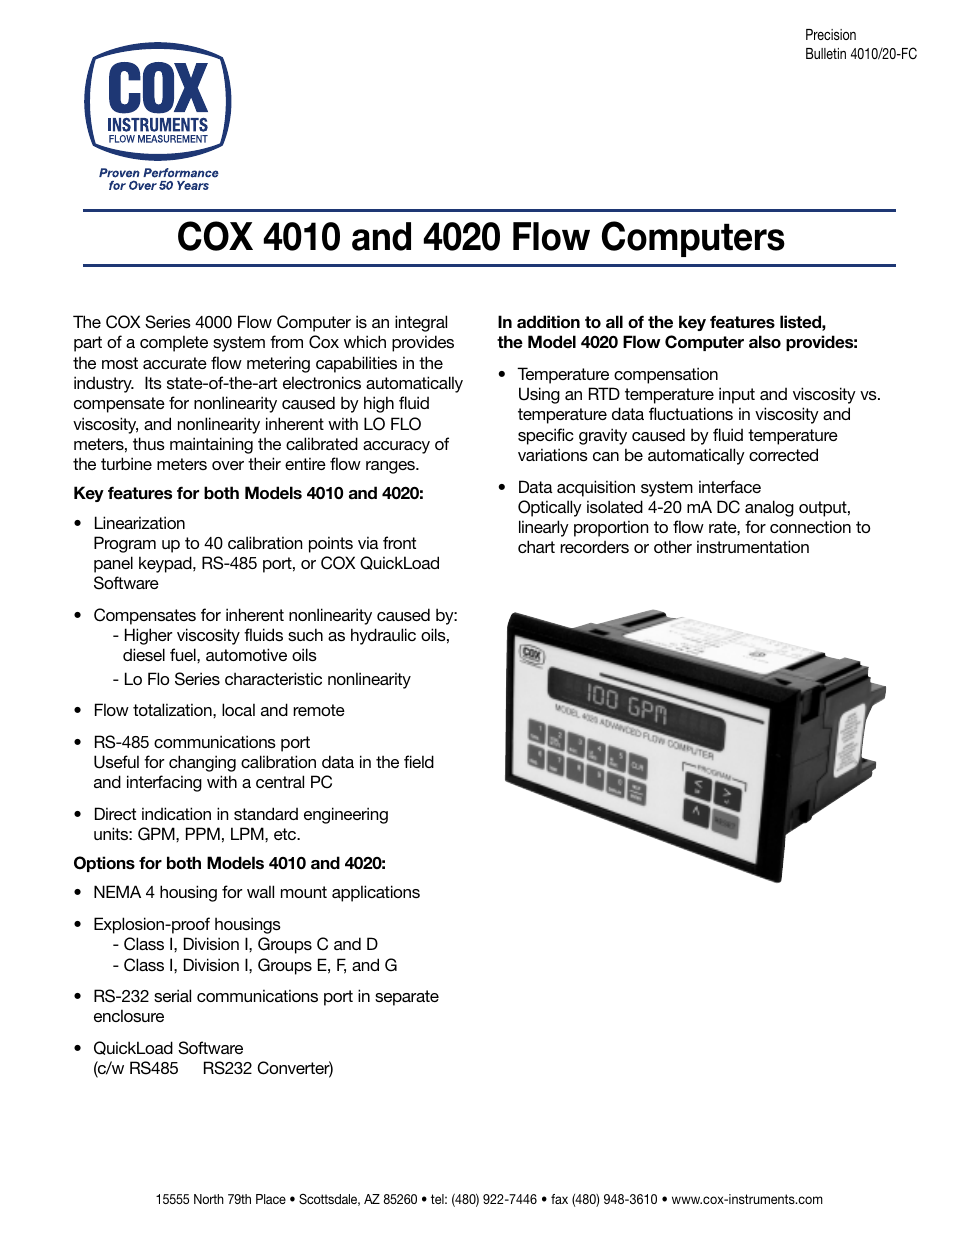 Badger Meter 4020 Flow Computers User Manual | 2 pages | Also for: 4010